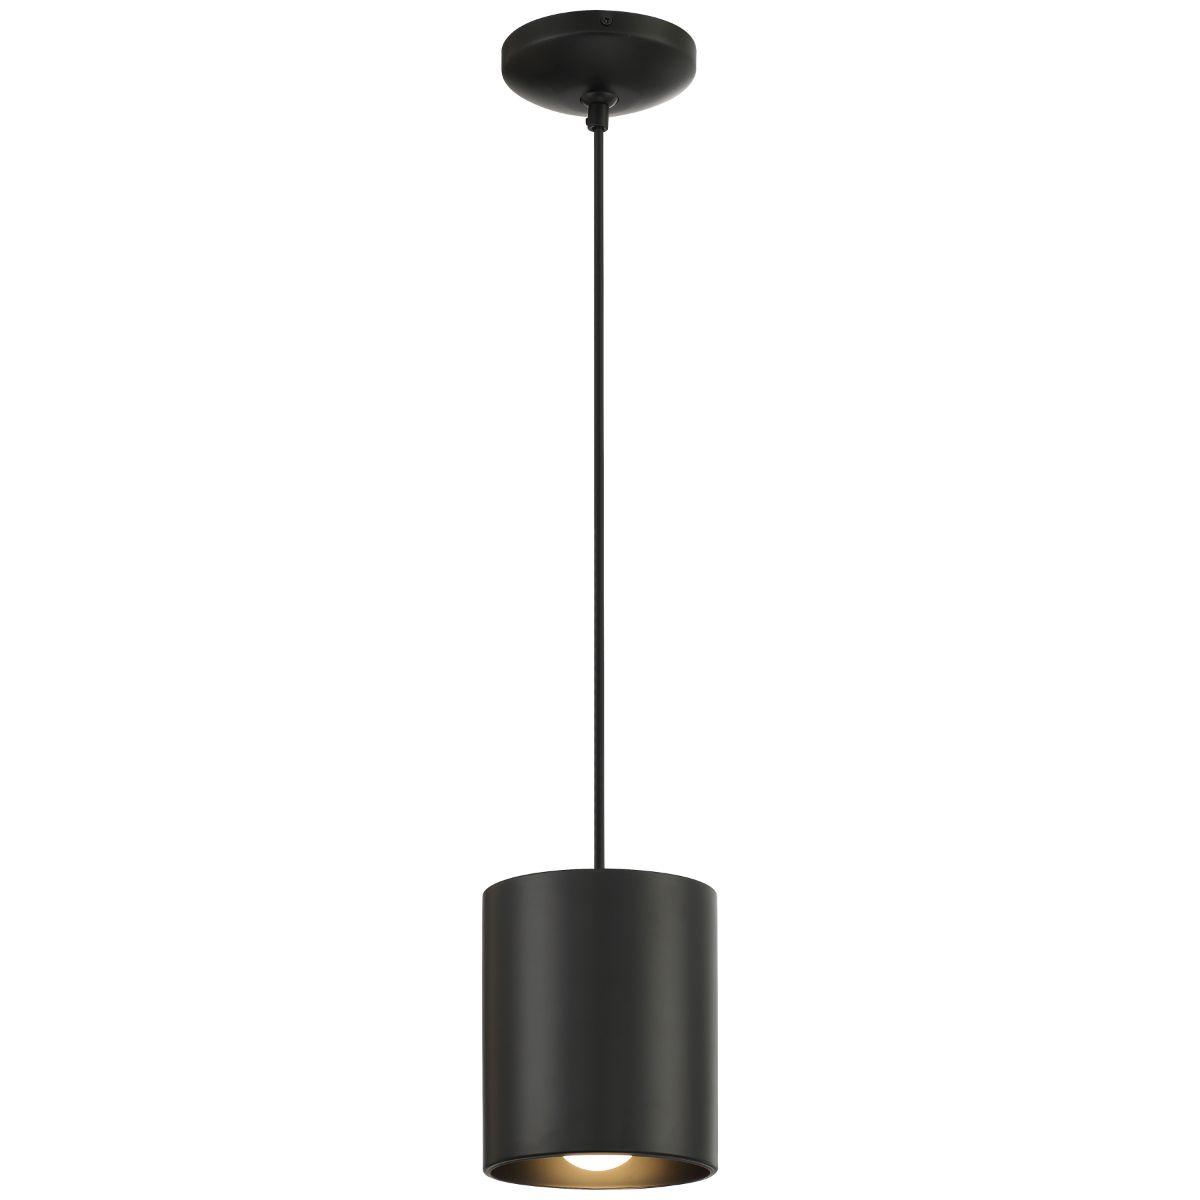 Pilson XL 7 in. Pendant Light with Cord - Bees Lighting